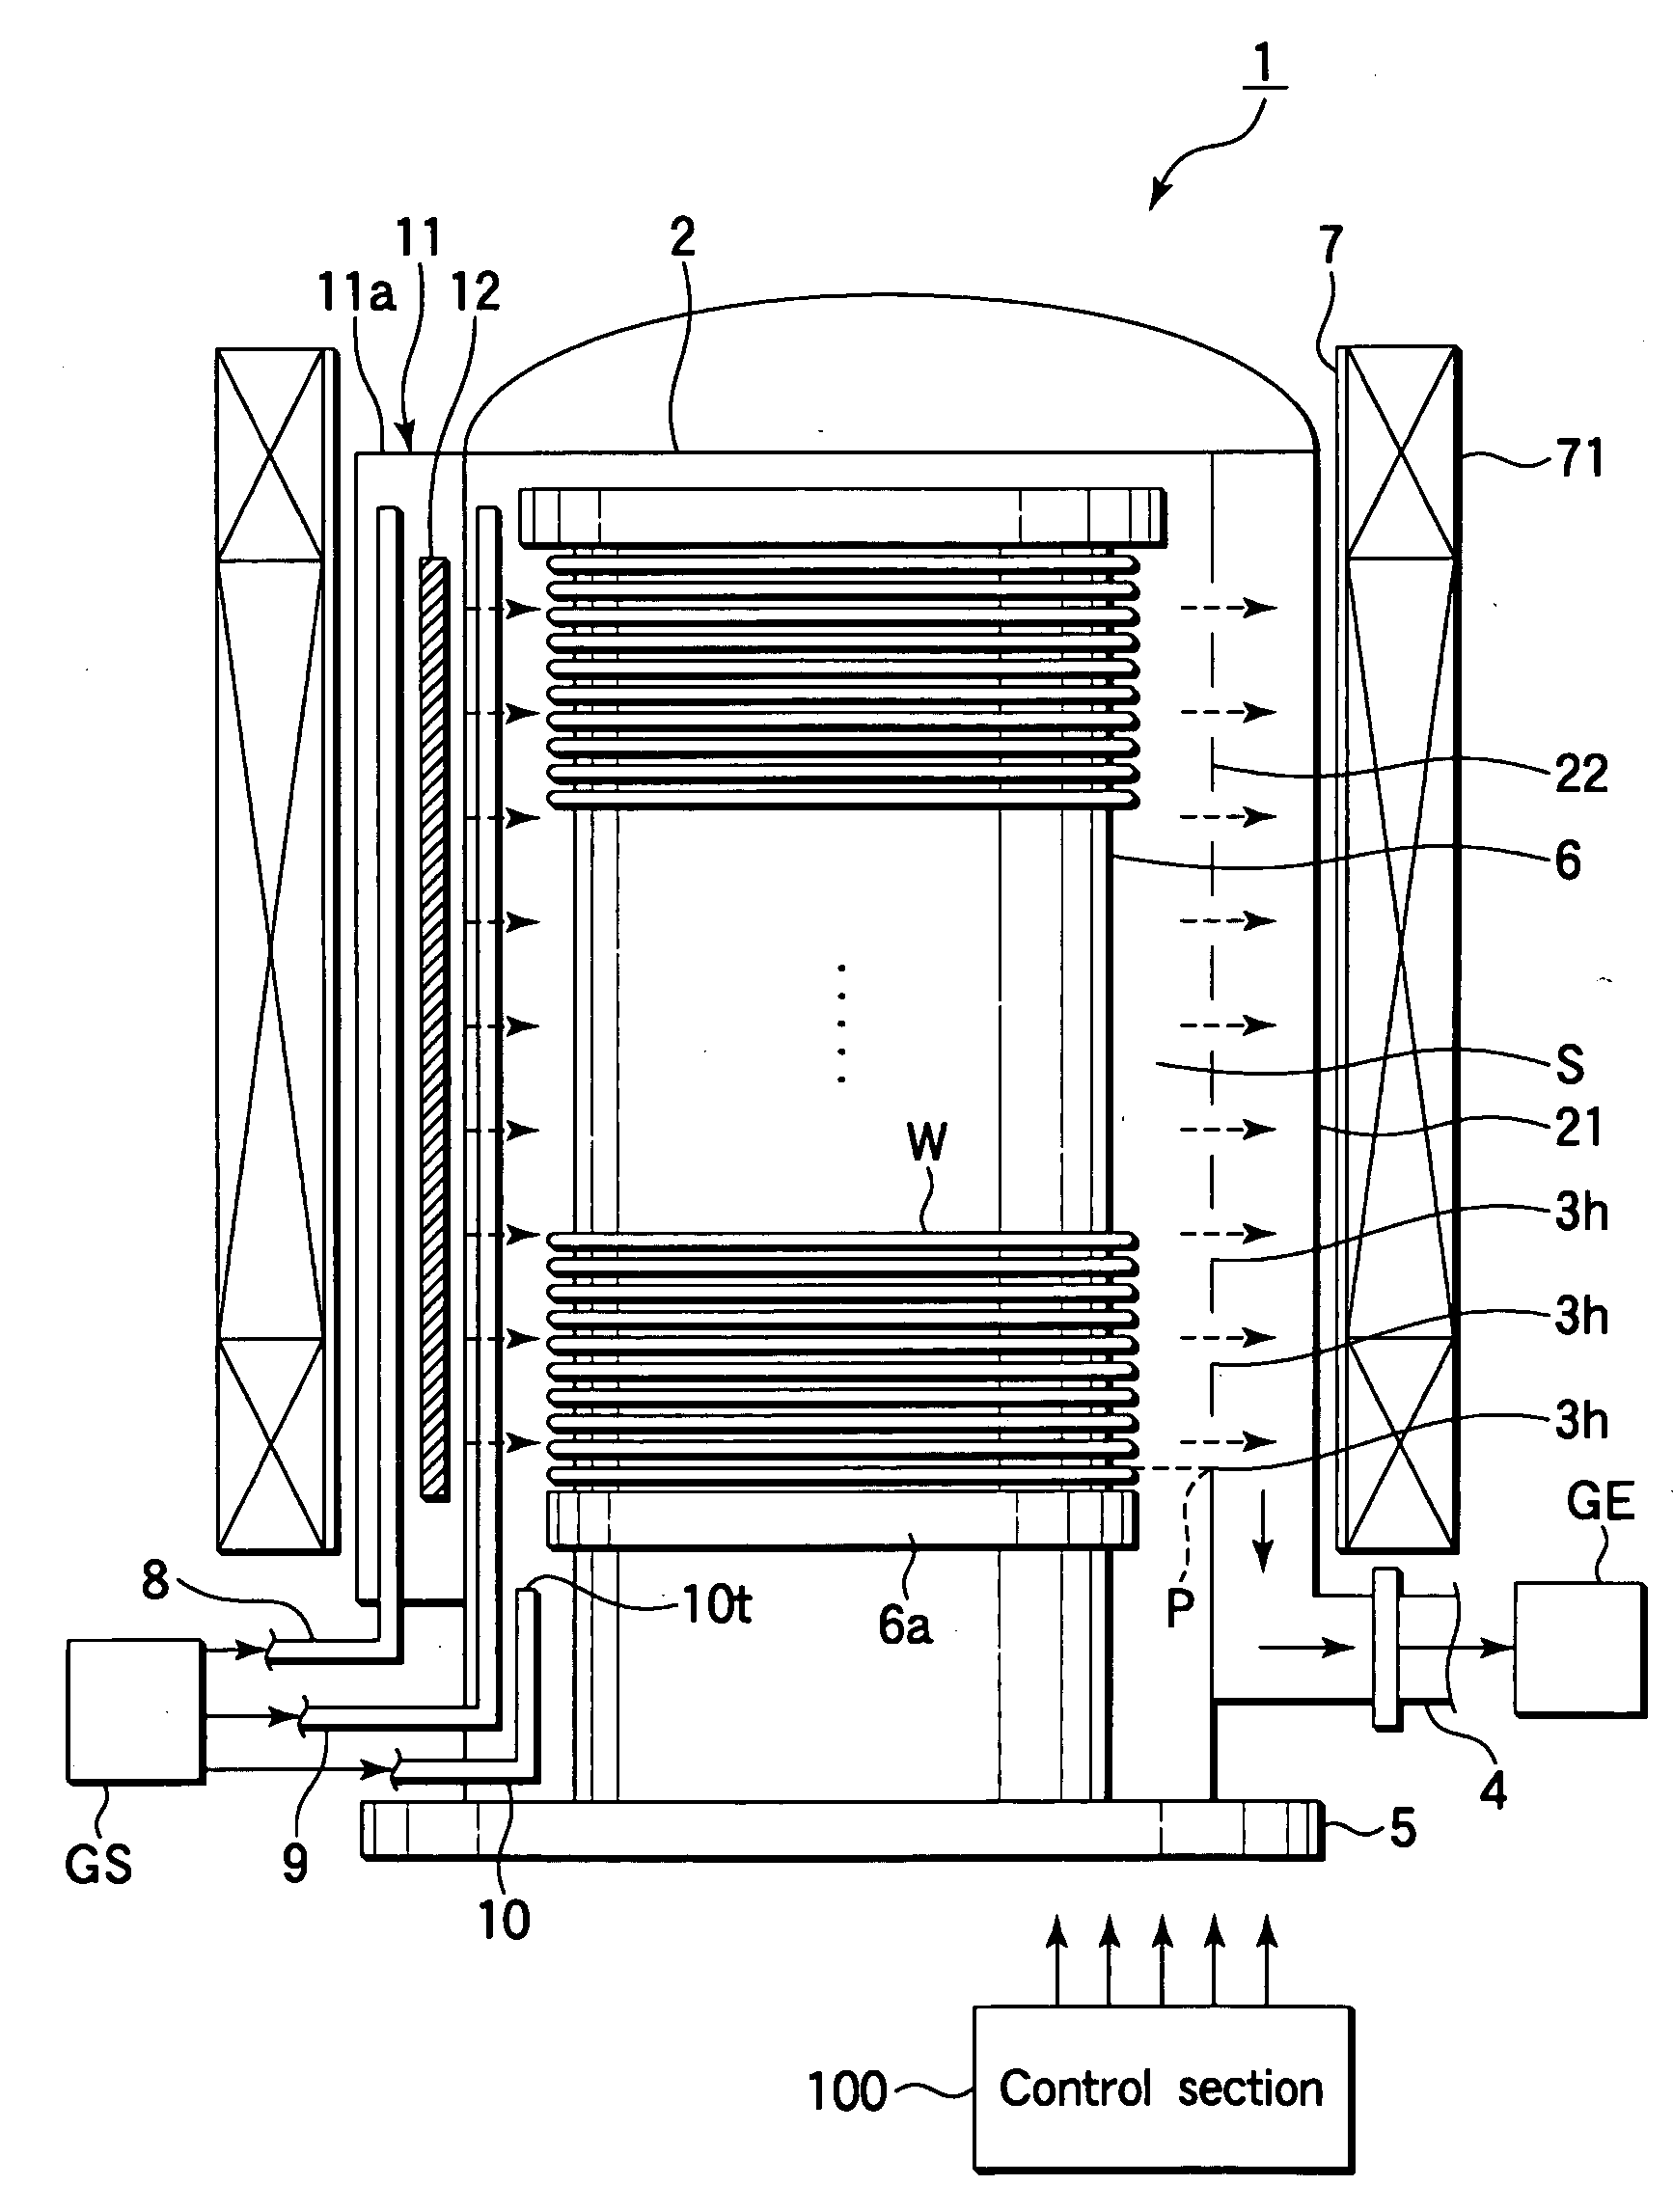 Film formation apparatus for semiconductor process